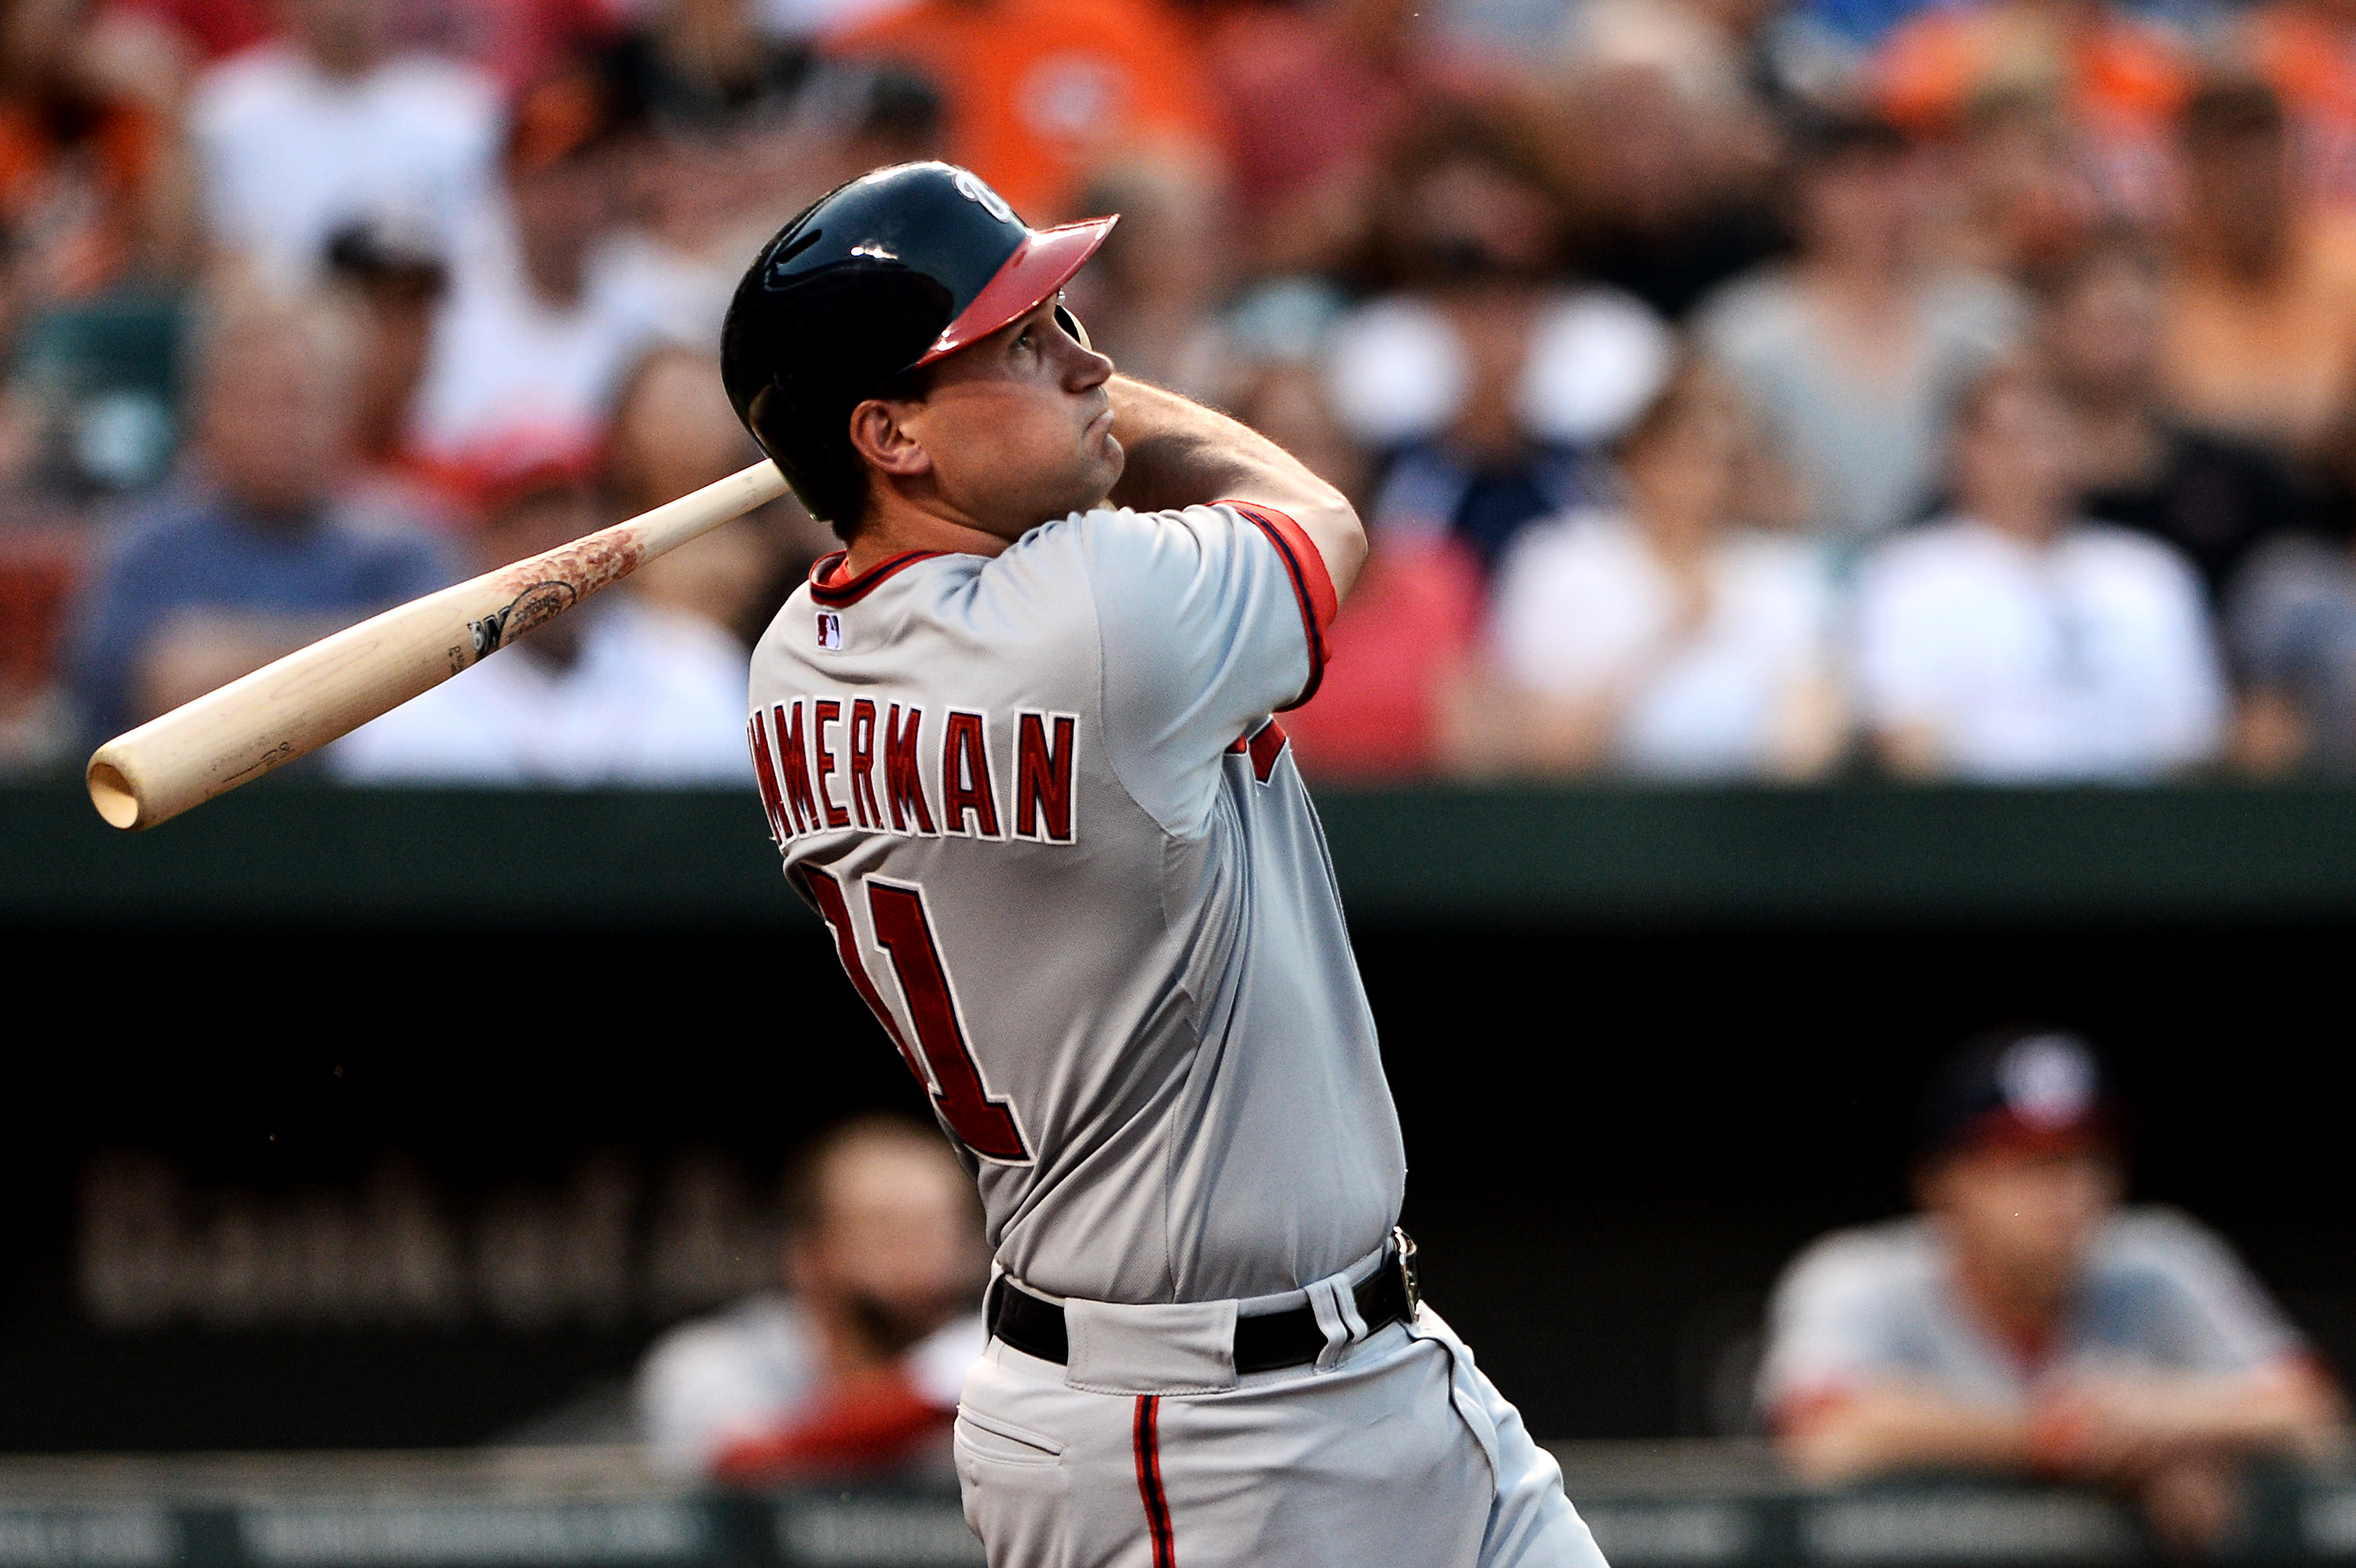 Nationals offer Ryan Zimmerman a $2 million, 1-year contract